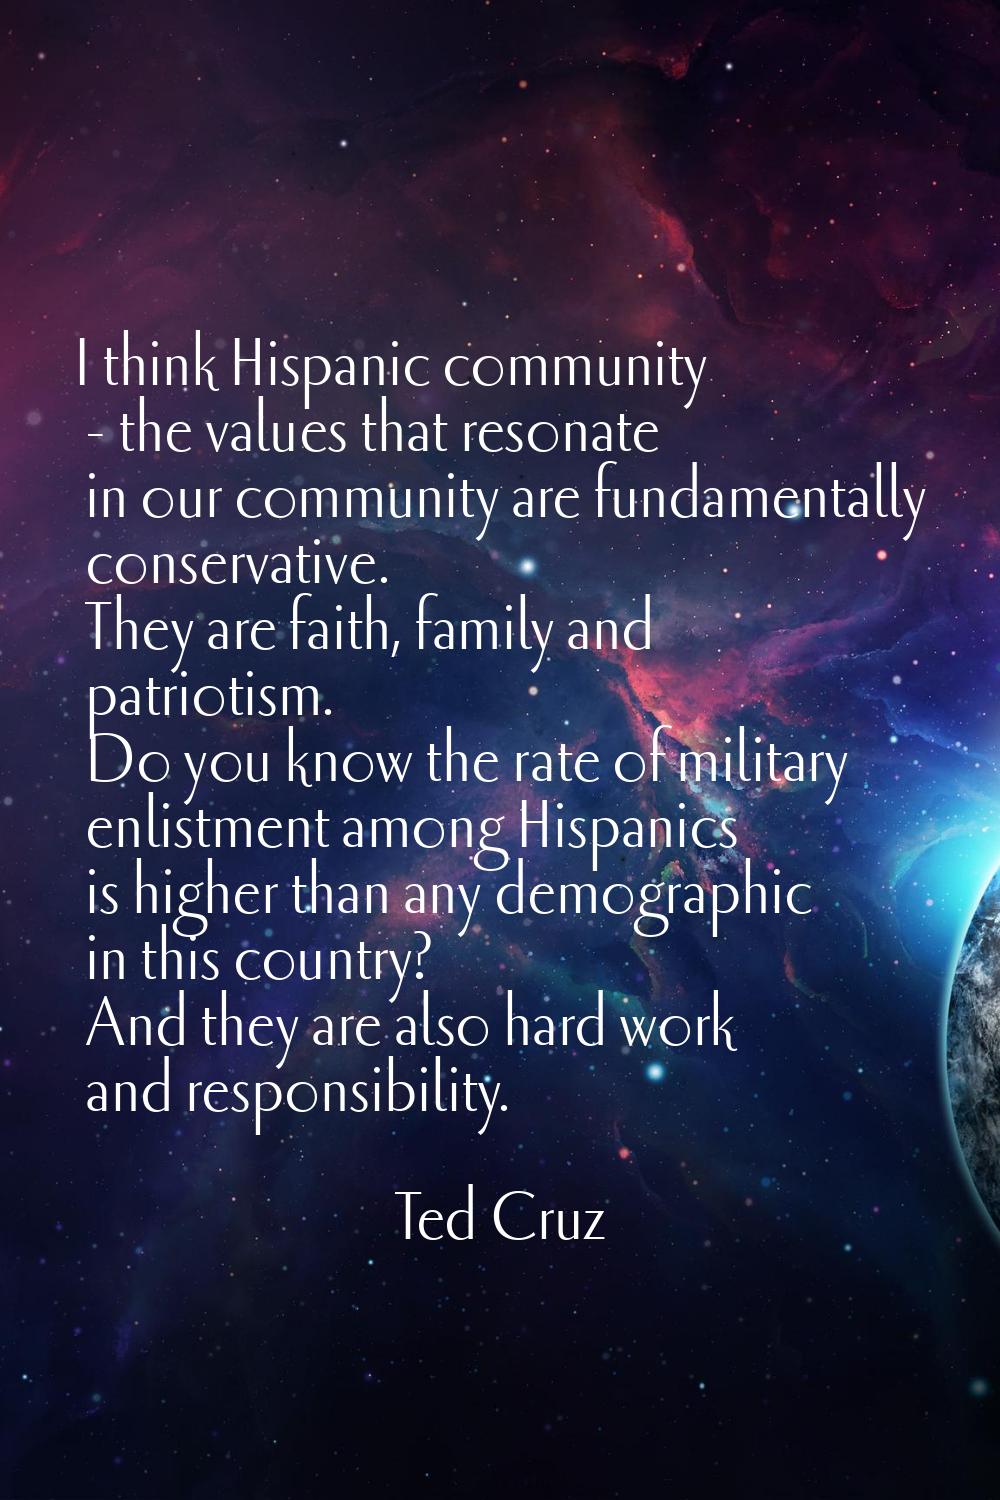 I think Hispanic community - the values that resonate in our community are fundamentally conservati